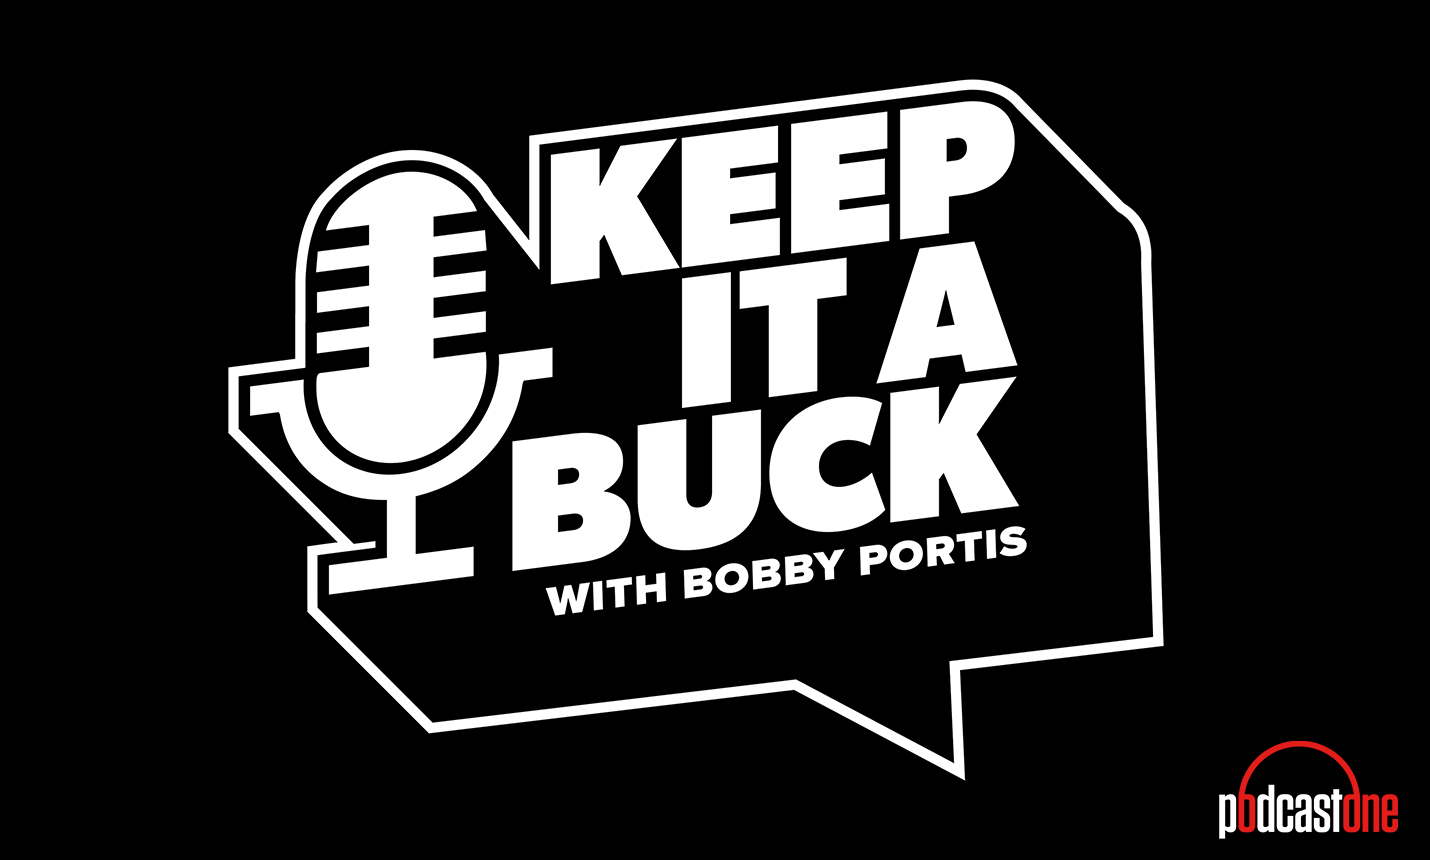 Keep It A Buck with Bobby Portis